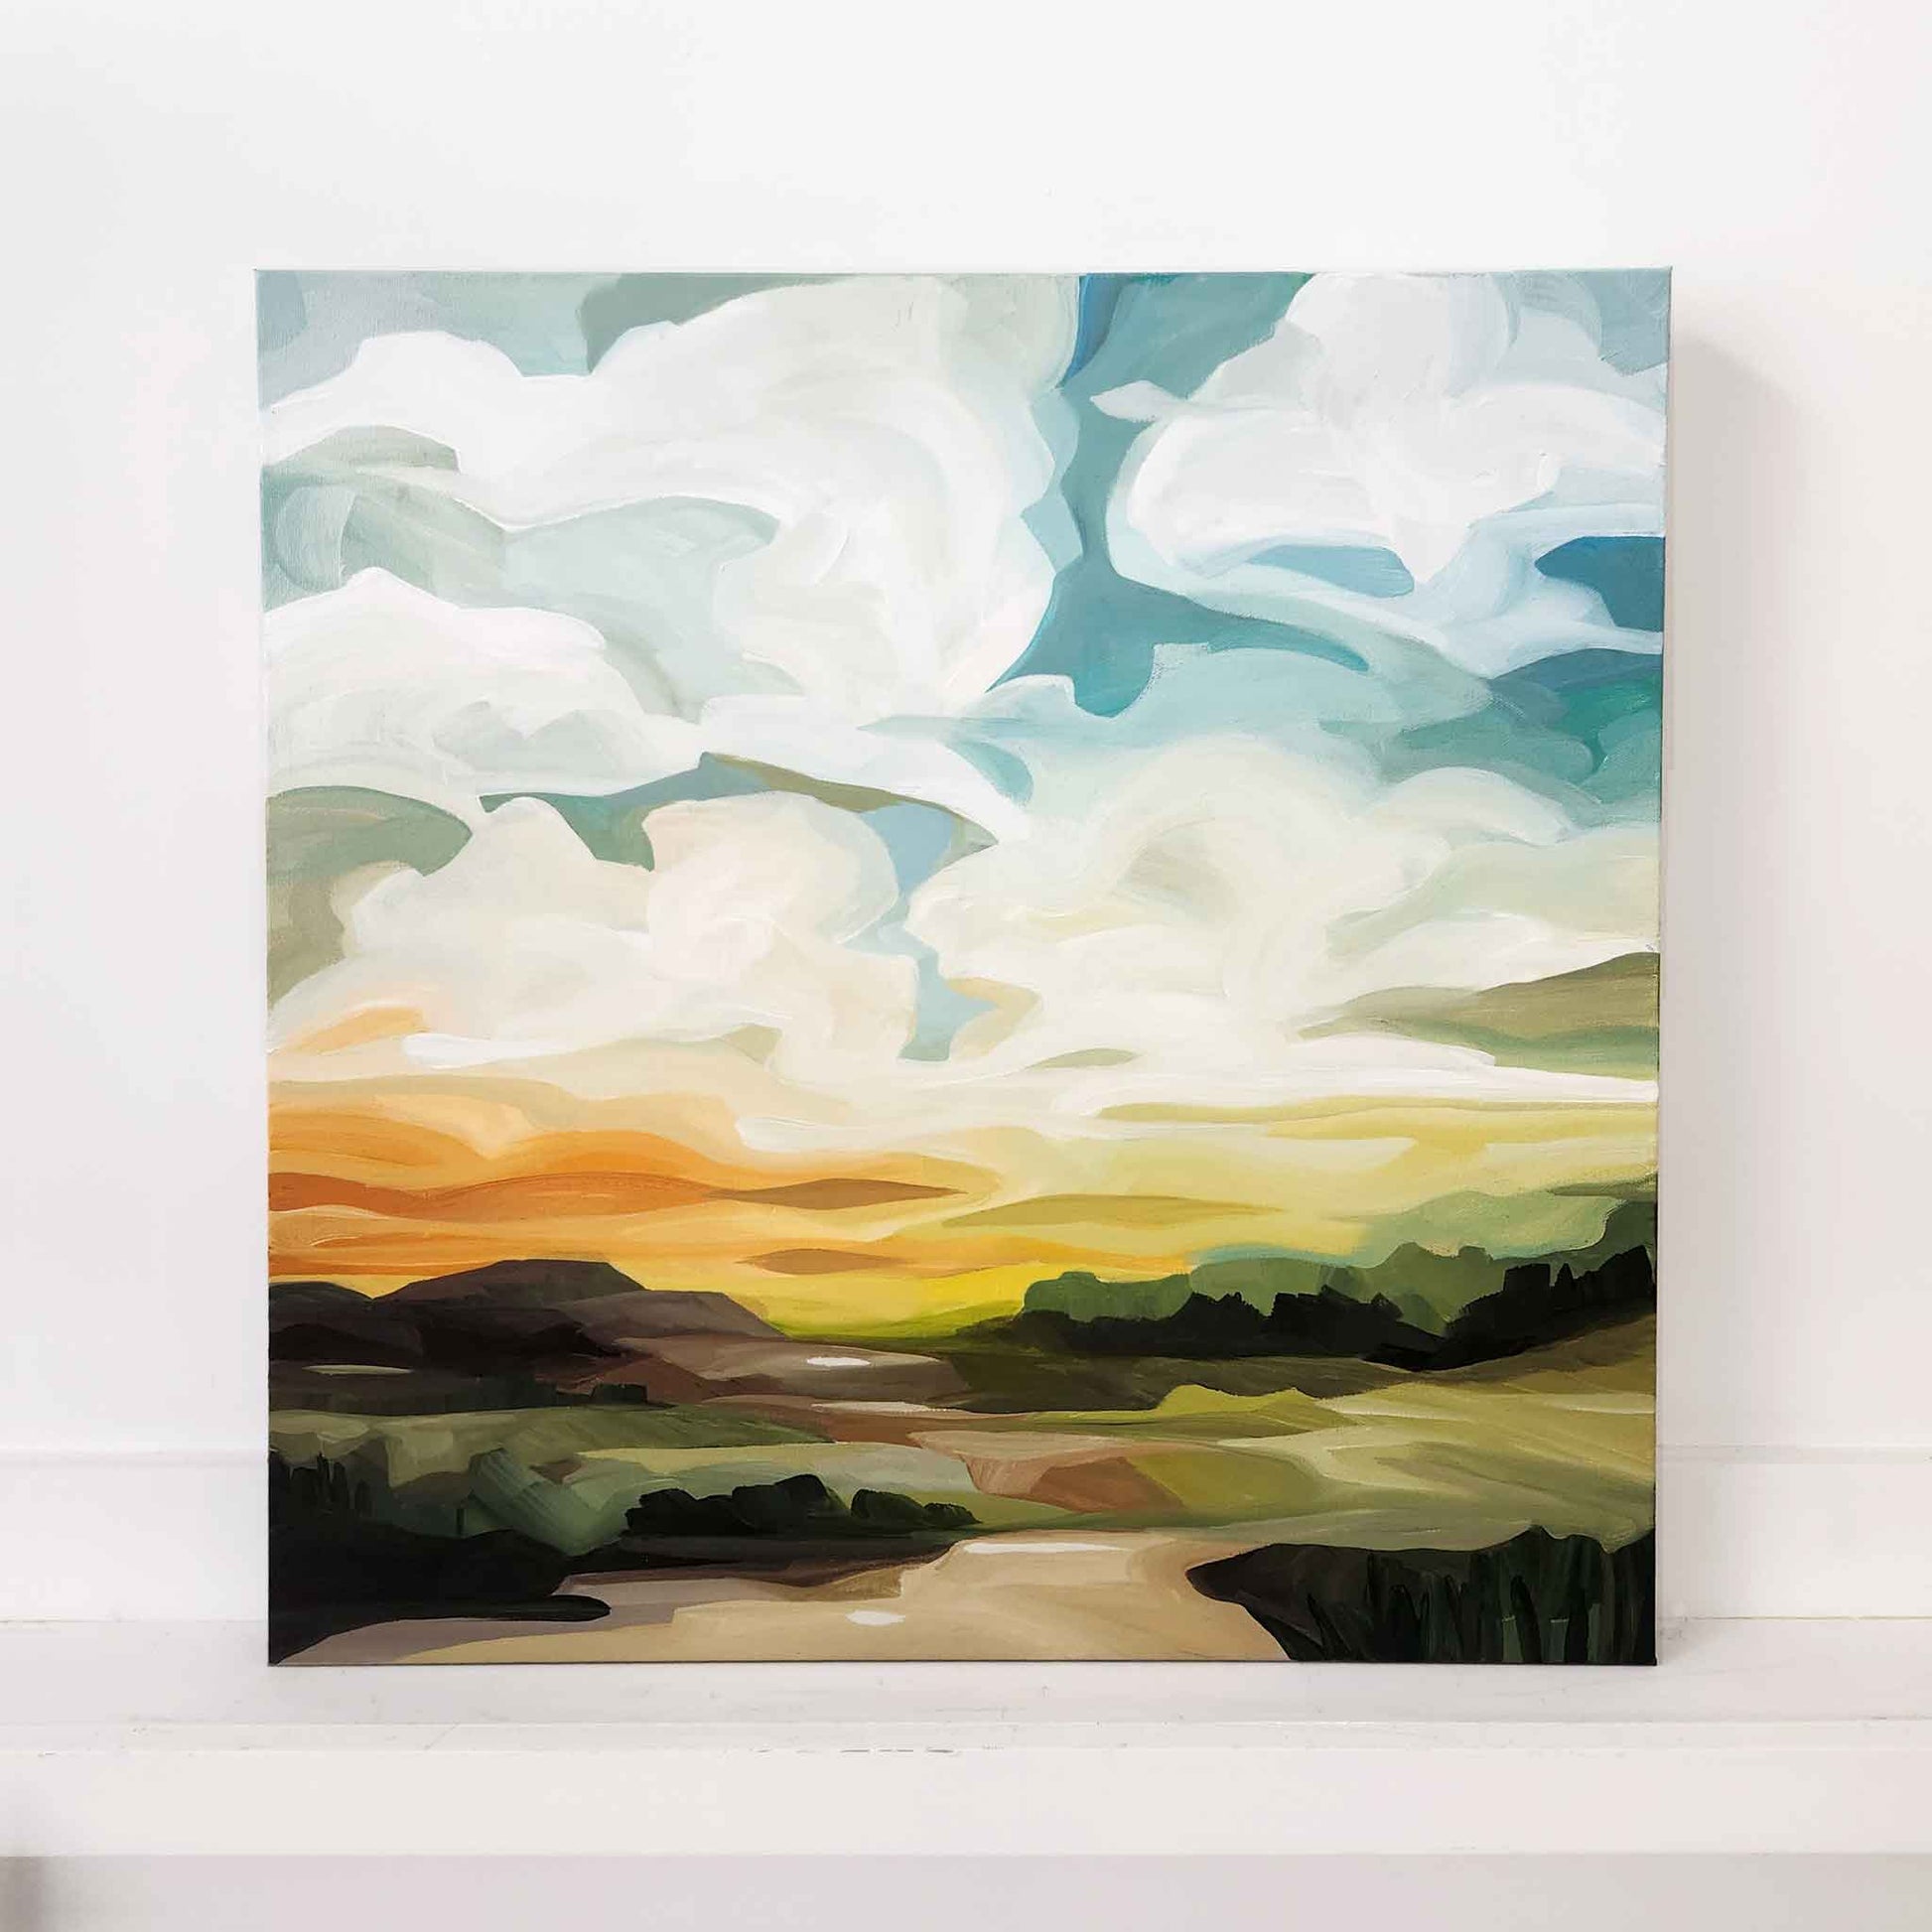 abstract landscape painting of sunset sky with an orange horizon and translucent clouds across the evening sky